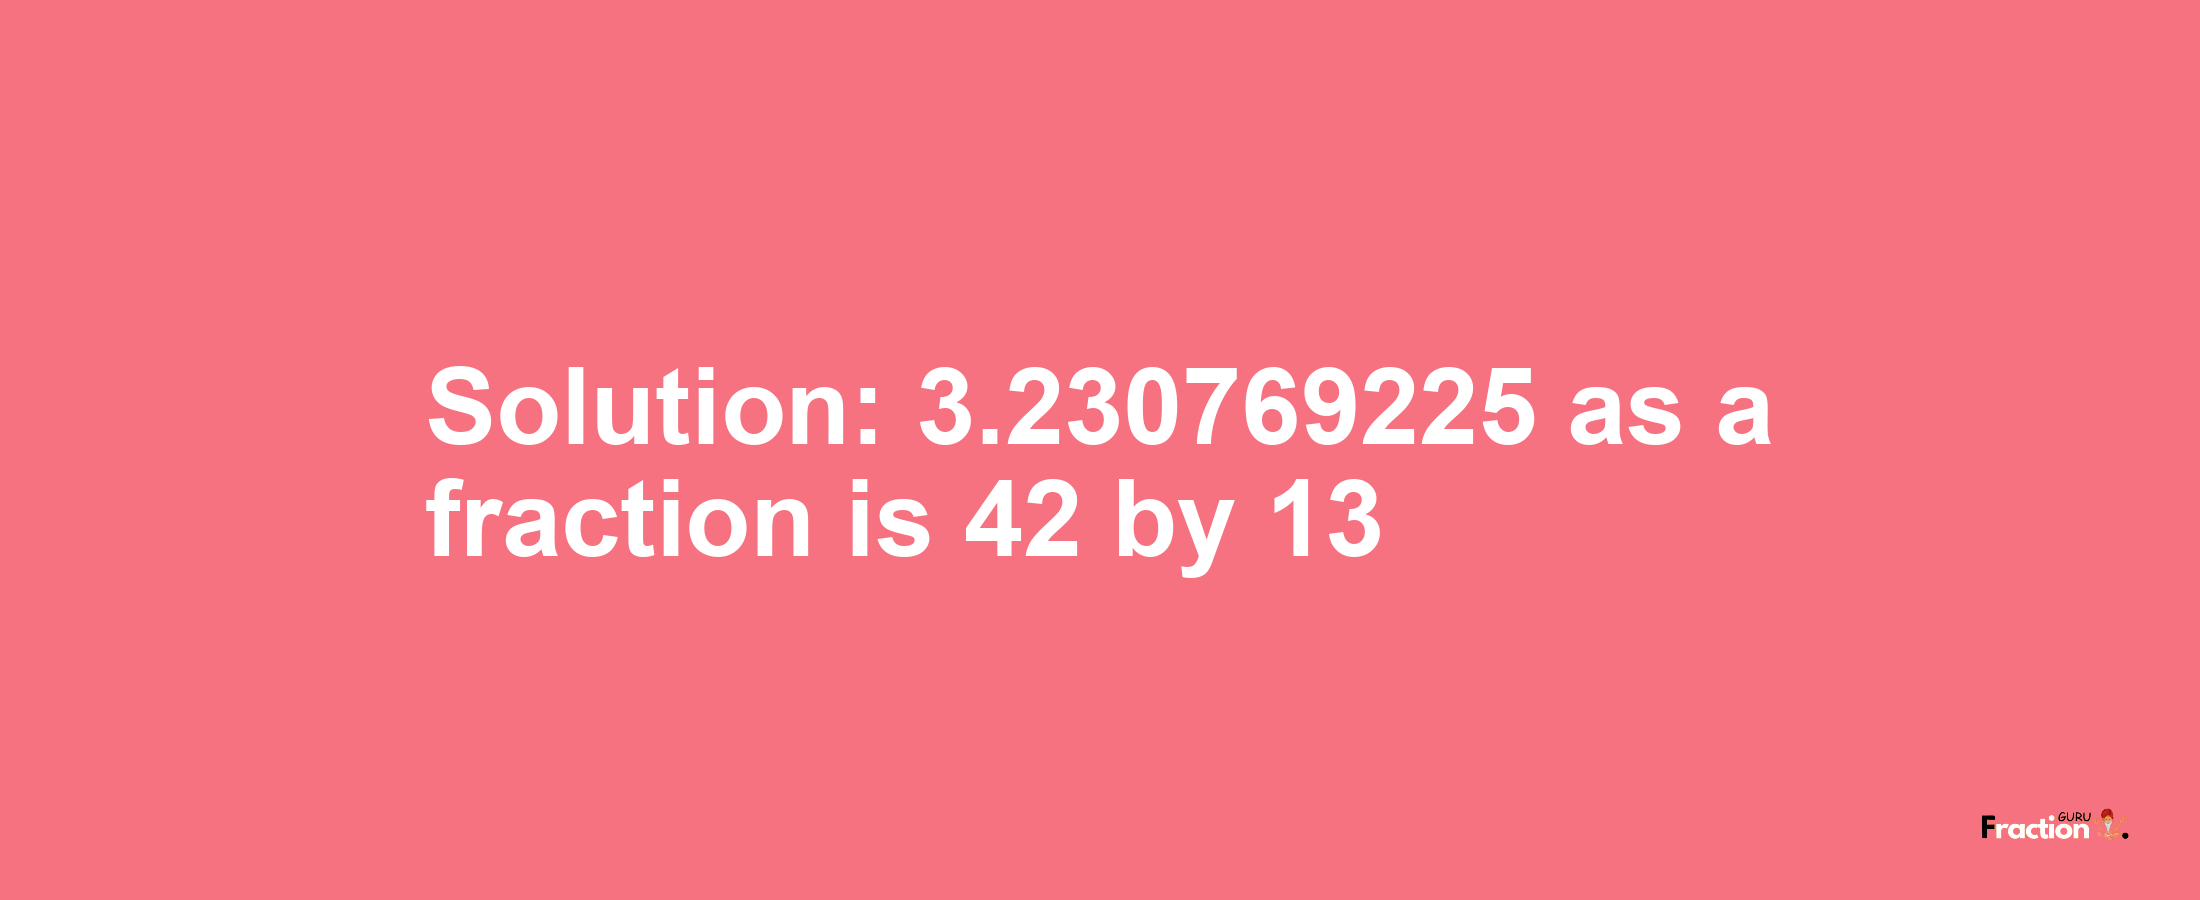 Solution:3.230769225 as a fraction is 42/13